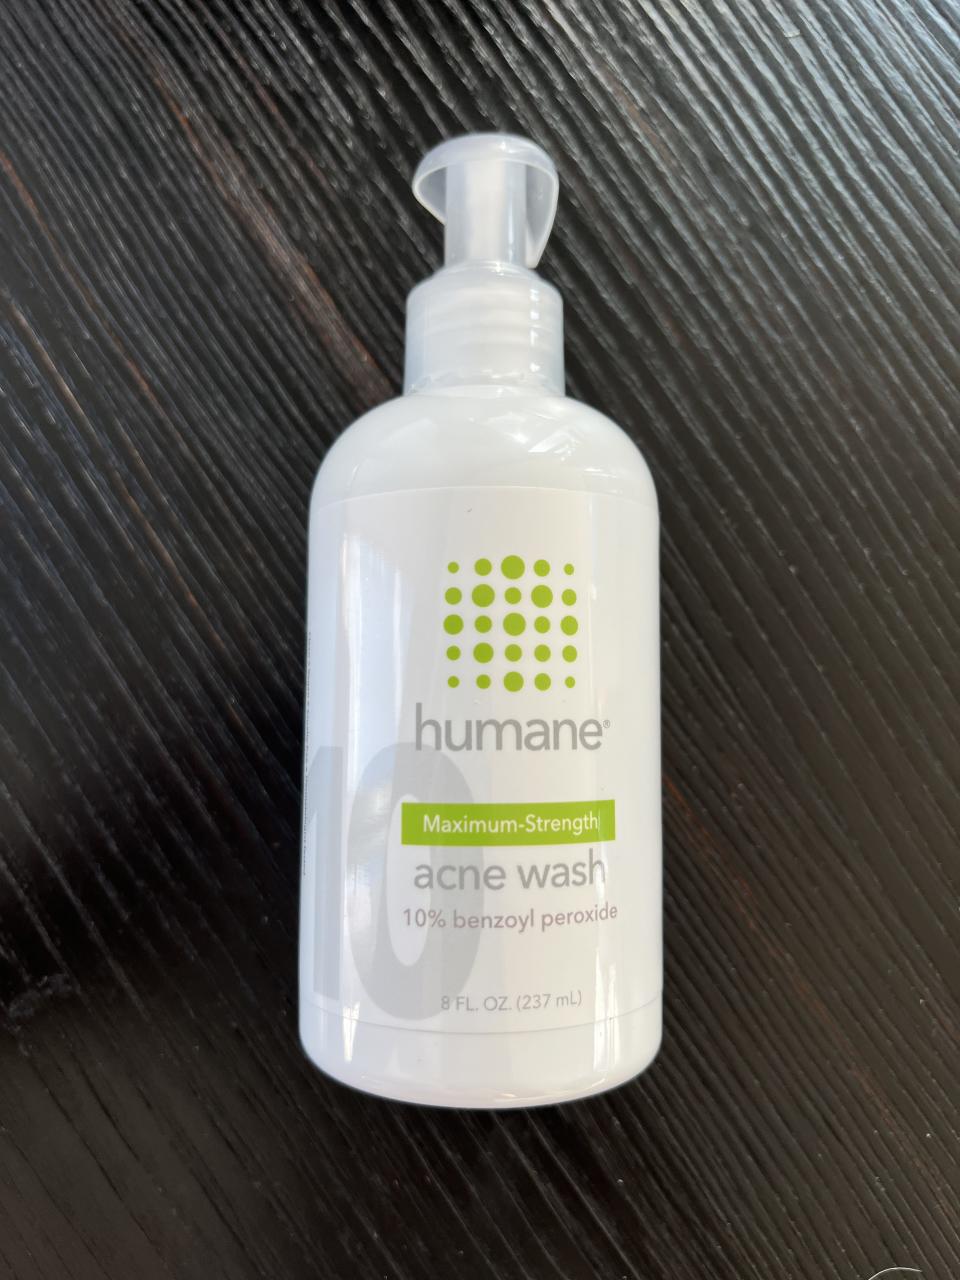 a bottle of the humane brand max strength acne wash resting on the table